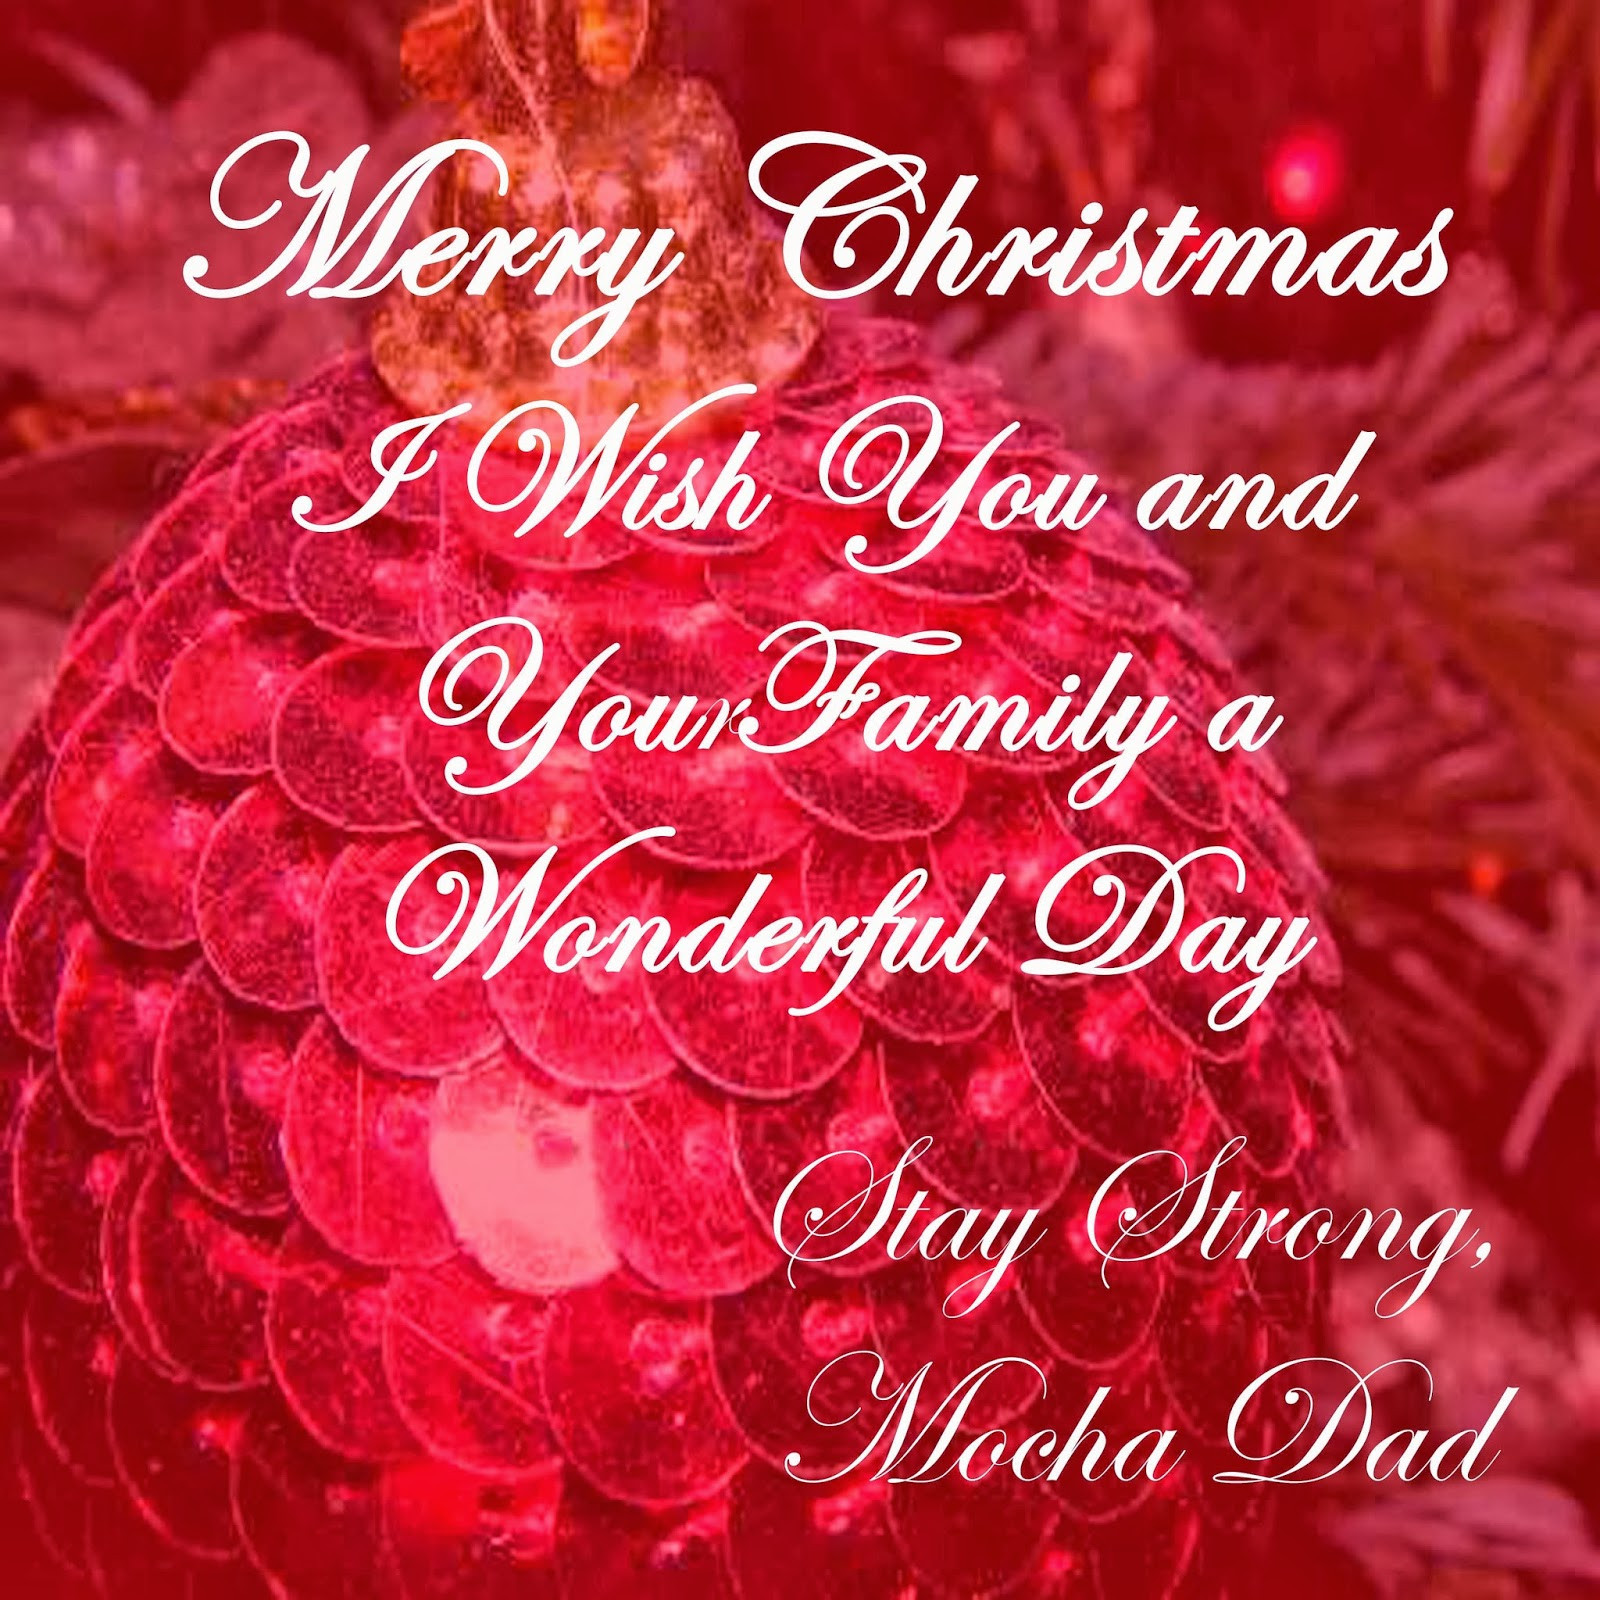 Merry Christmas Images And Quotes
 Top 20 Merry Christmas